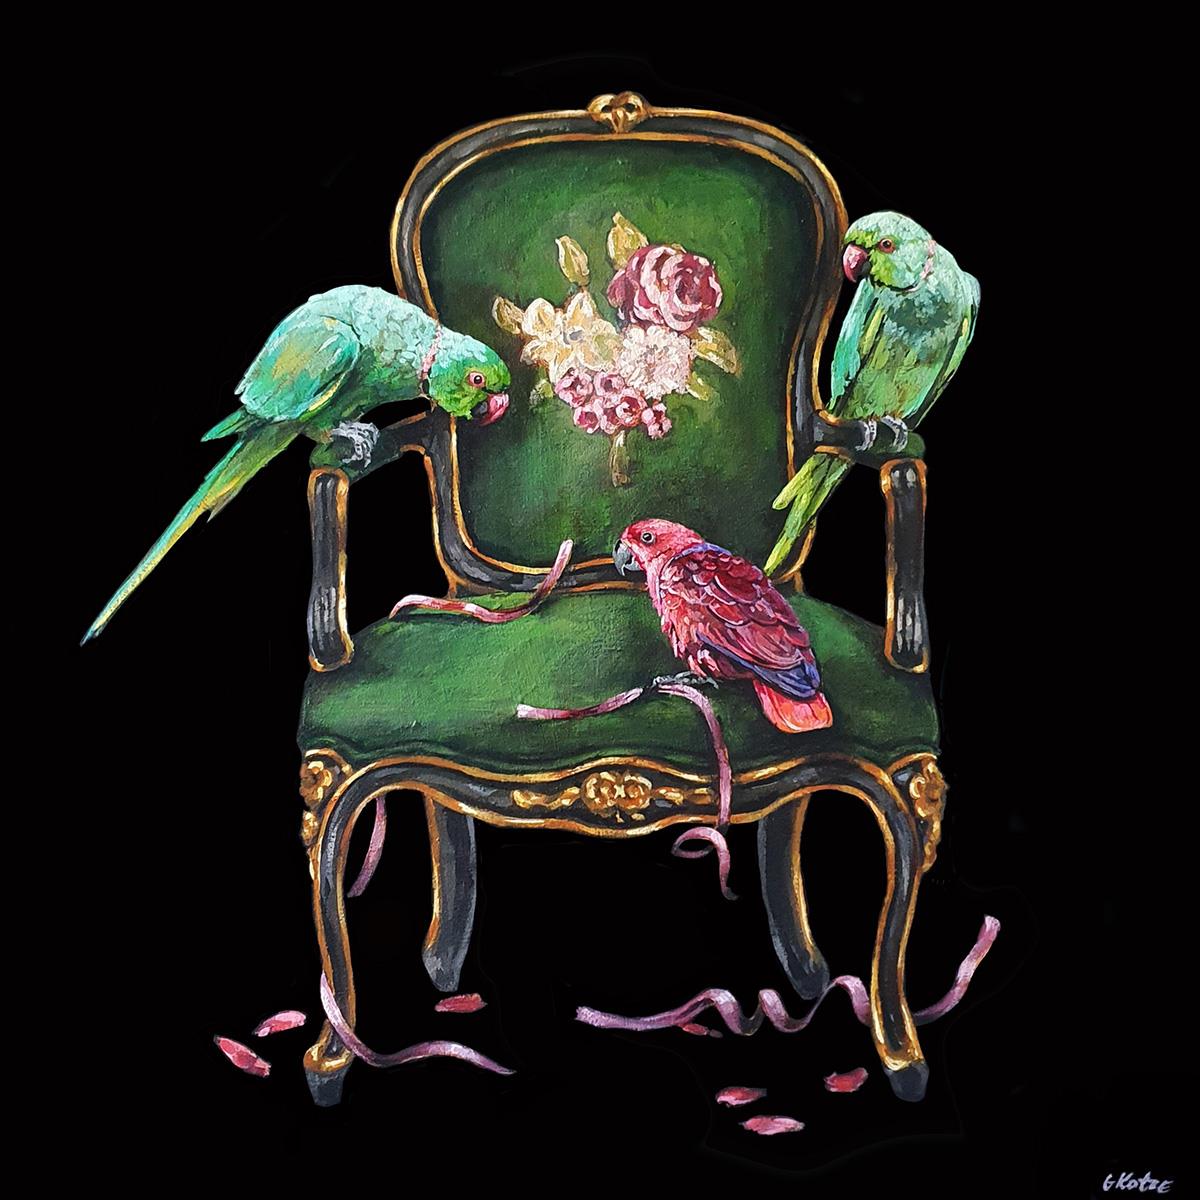 painting of green parrots perched on an antique chair